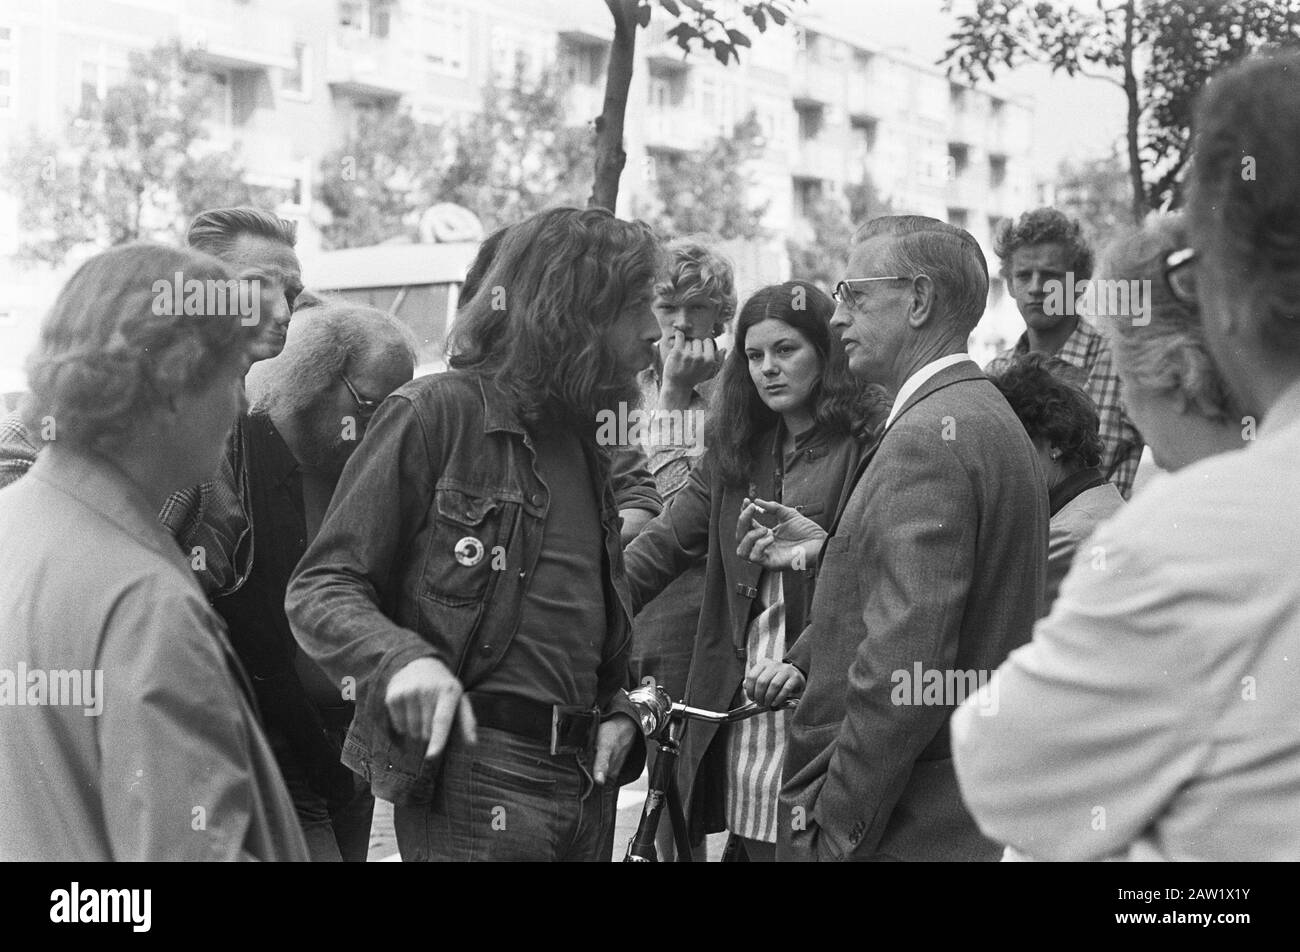 Parents of LTS students in Amsterdam have office of directors of the ITO school in Derkinderenstraat occupied, members of action-committee talking to Mr. Prince, Date : July 13, 1972 Location: Amsterdam, Noord-Holland Keywords: PARENTS, occupations, executives, call Stock Photo